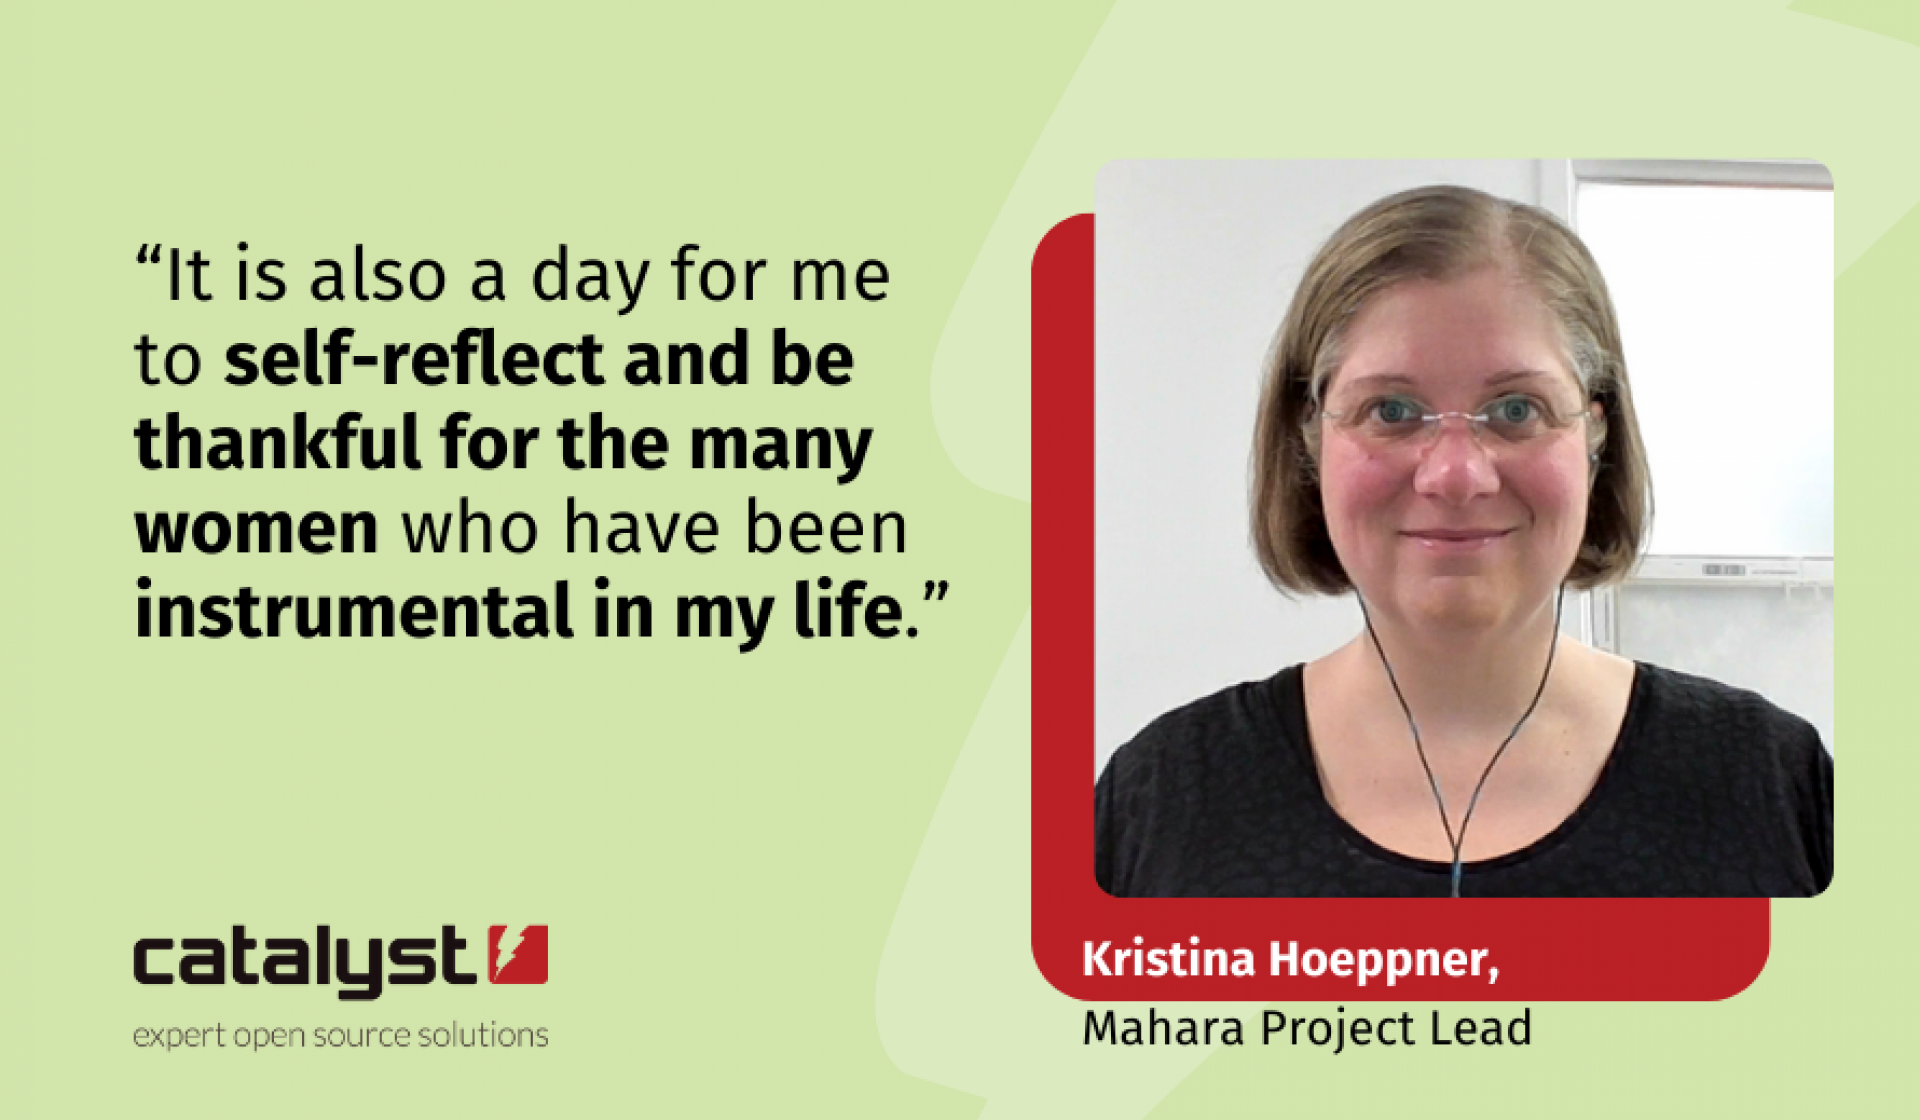 Kristina Hoeppner Mahara Project Lead explains what International Womens Day means to her.